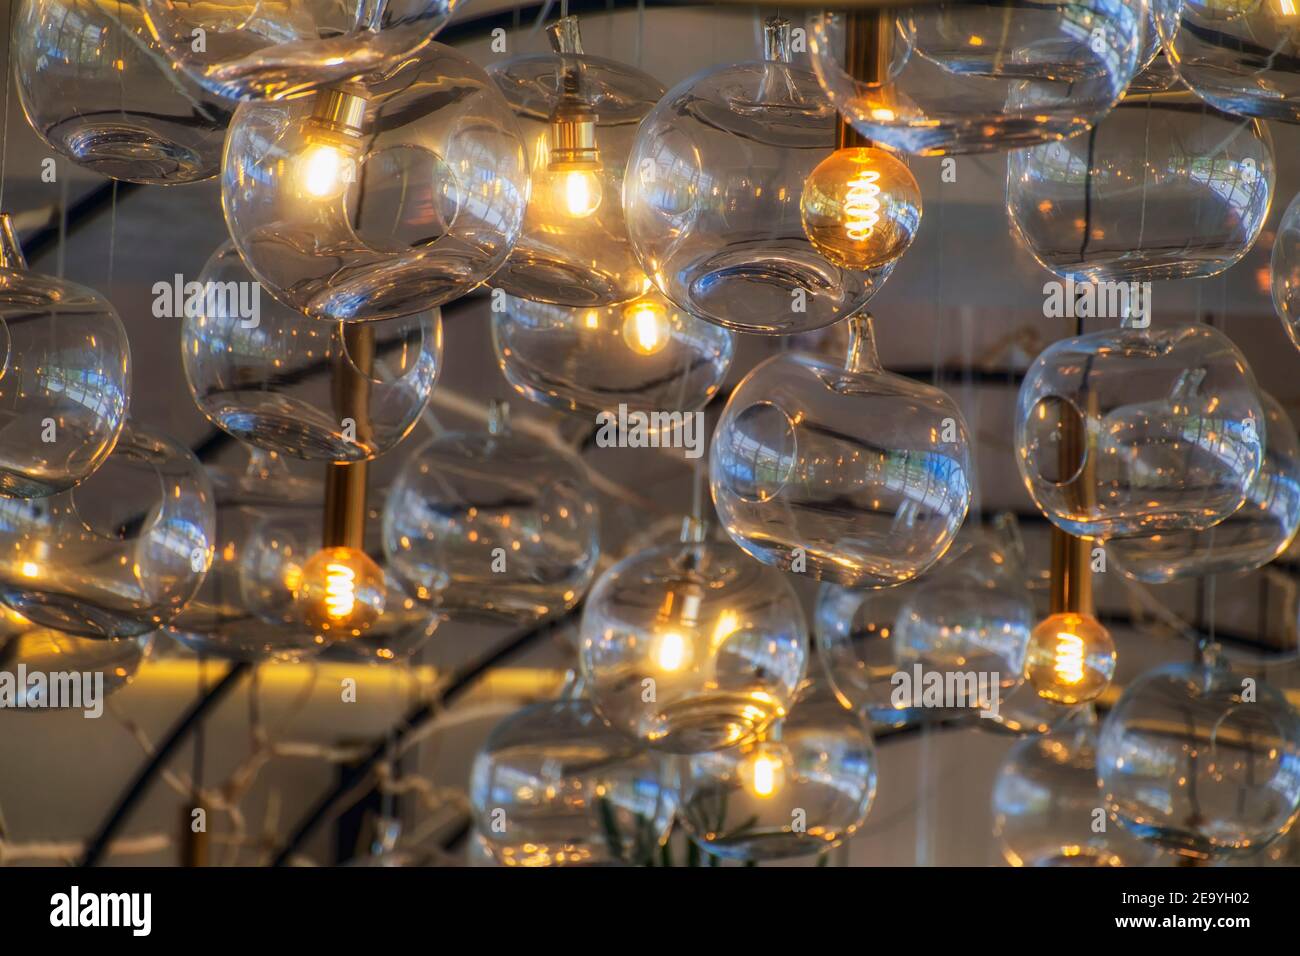 Burning and non-burning lamps in round plafonds Stock Photo